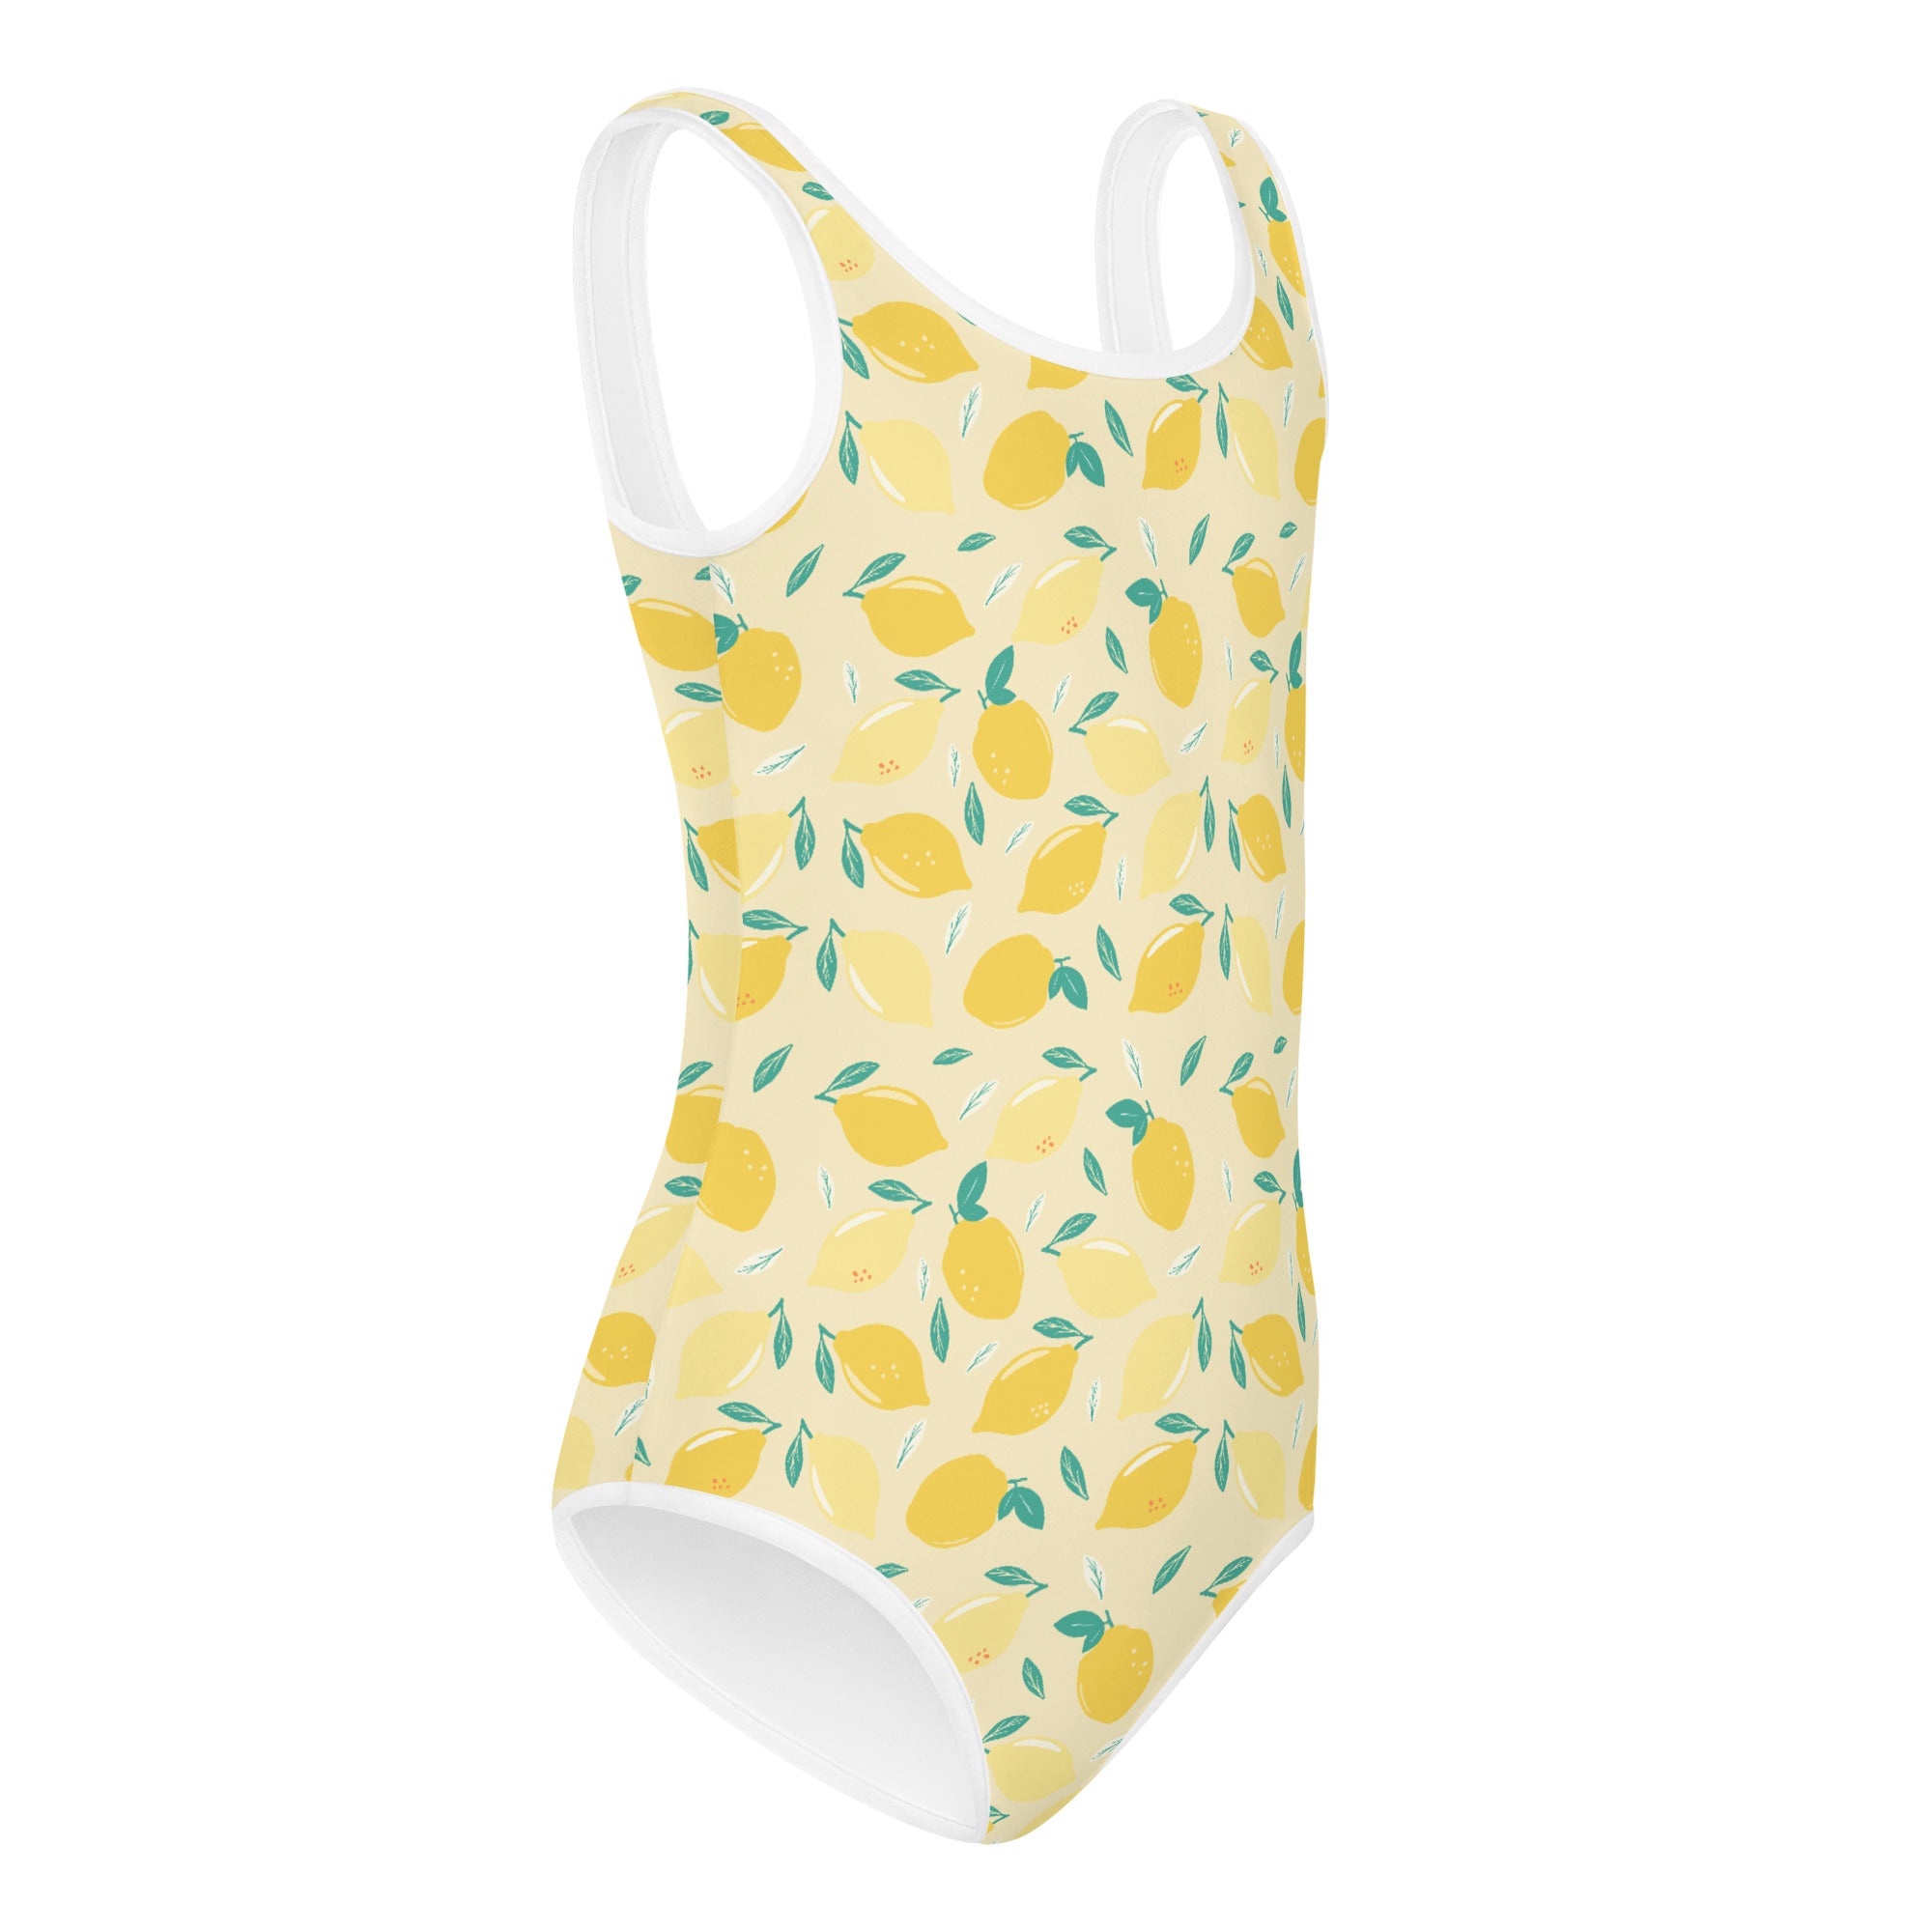 side view of the girl's swimsuit with summer lemon design